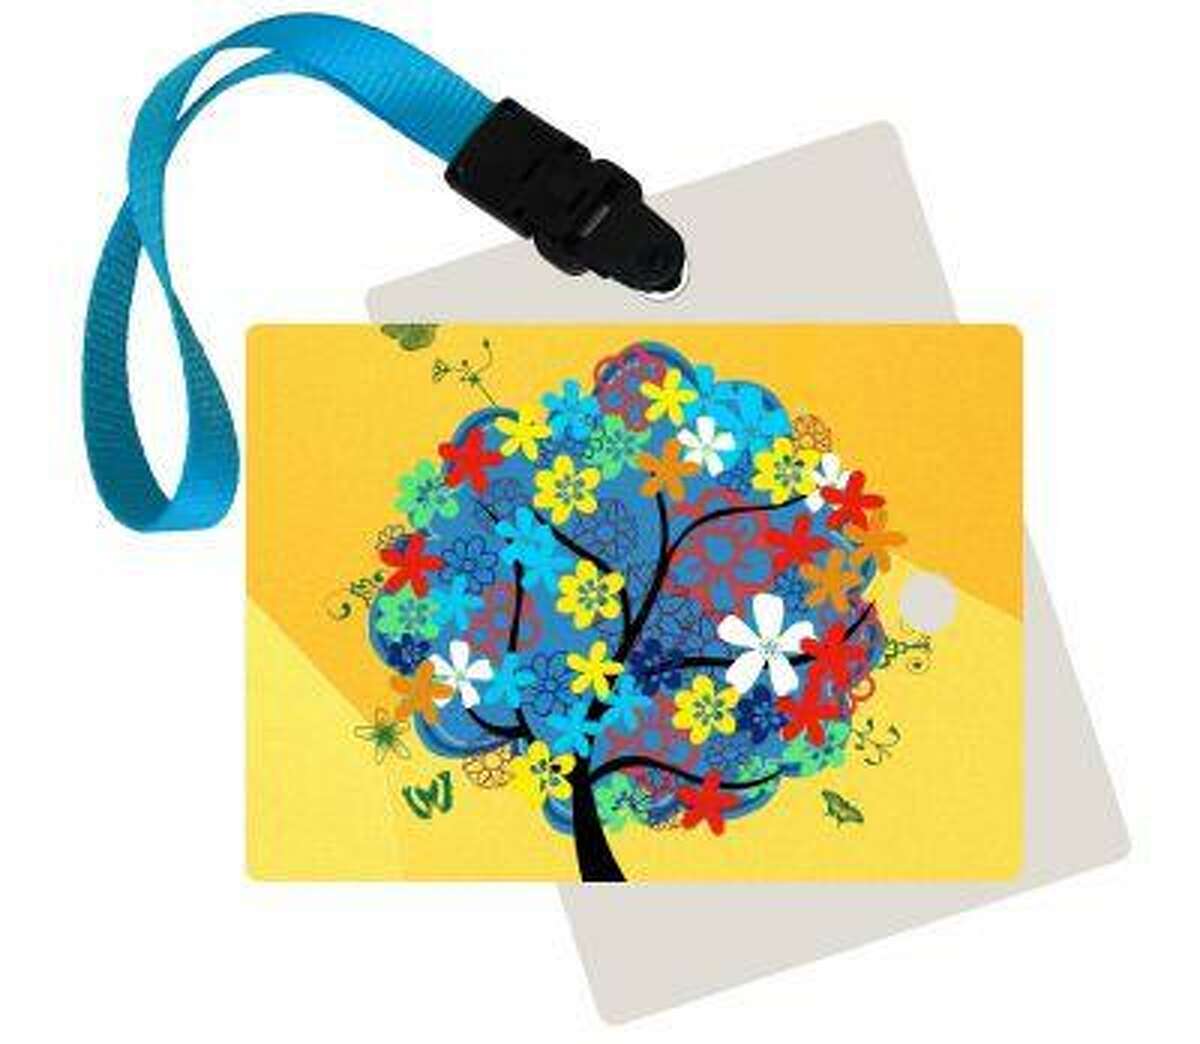 This publicity photo provided by CafePress shows a tree hugger tag for a backpack. Never lose another backpack with one of Café Press's cool customizable tags, as the company partnered with Snapily in October 2012 to create lenticular printed favorite photos with a 3-D, animated effect. There are geometric, tree or paisley designs too, or you can upload your own photos and create a personalized tag (www.cafepress.com). (AP Photo/CafePress)